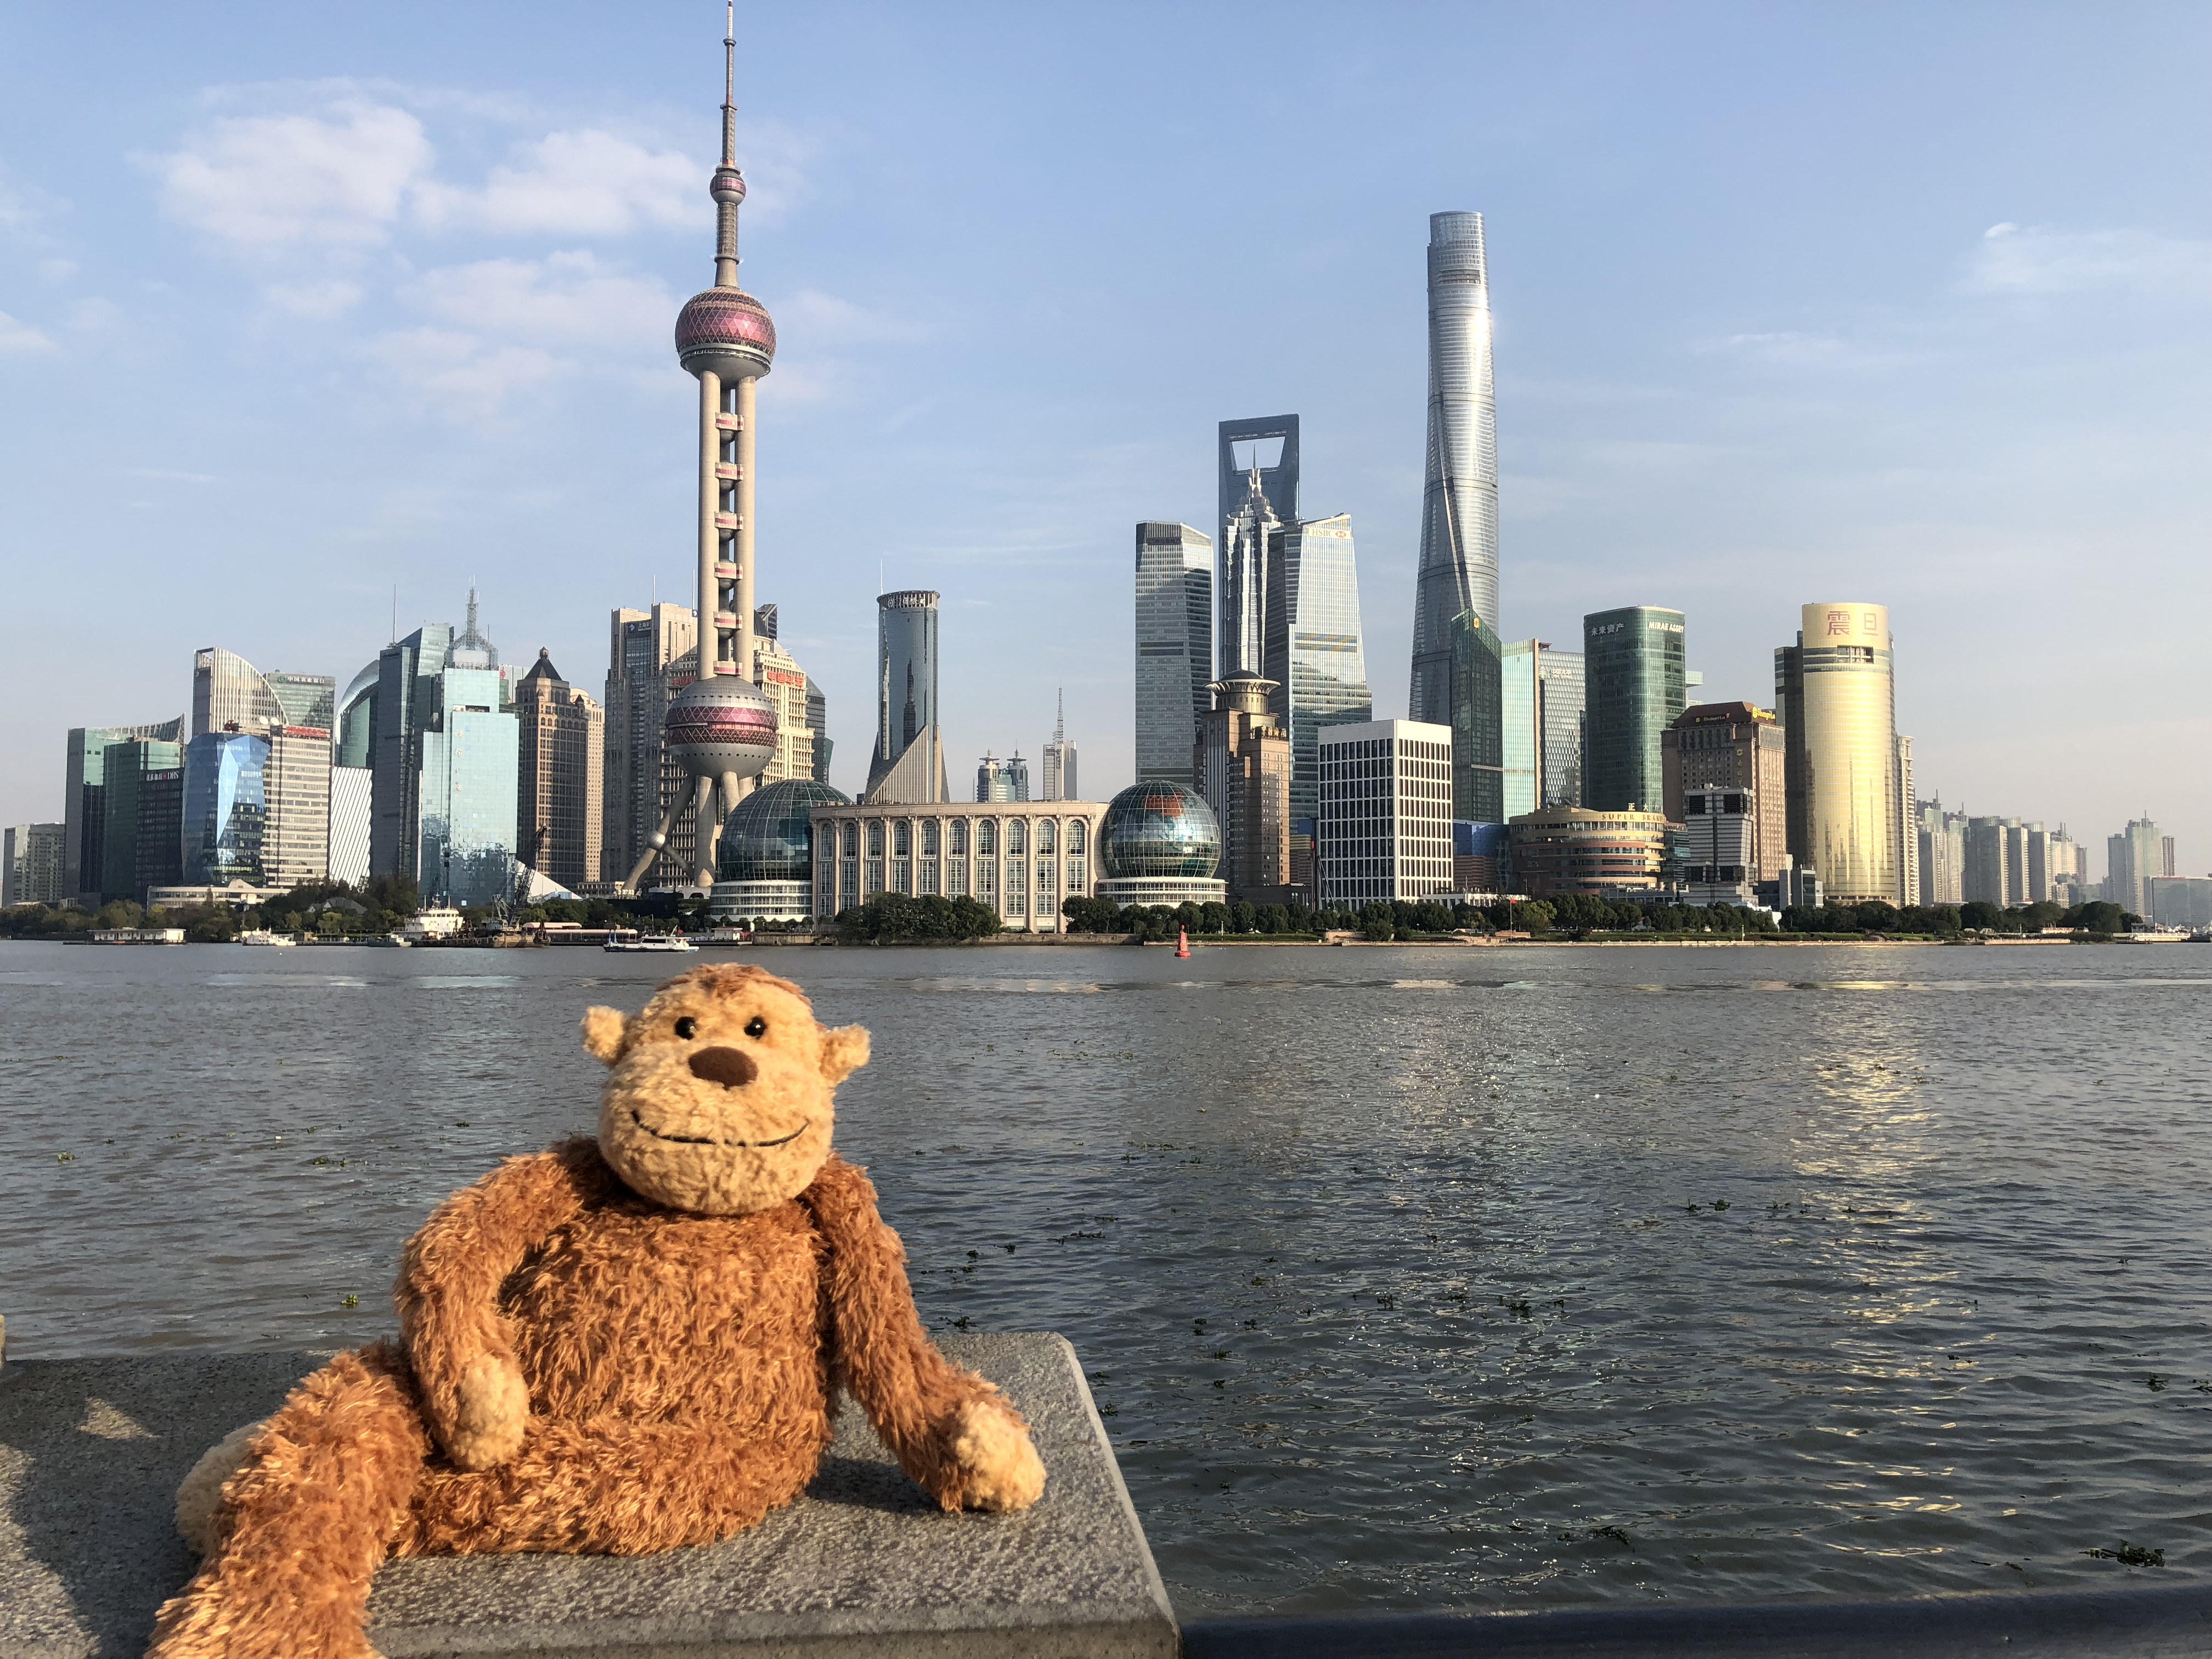 a stuffed animal on a stone ledge by water with a city in the background